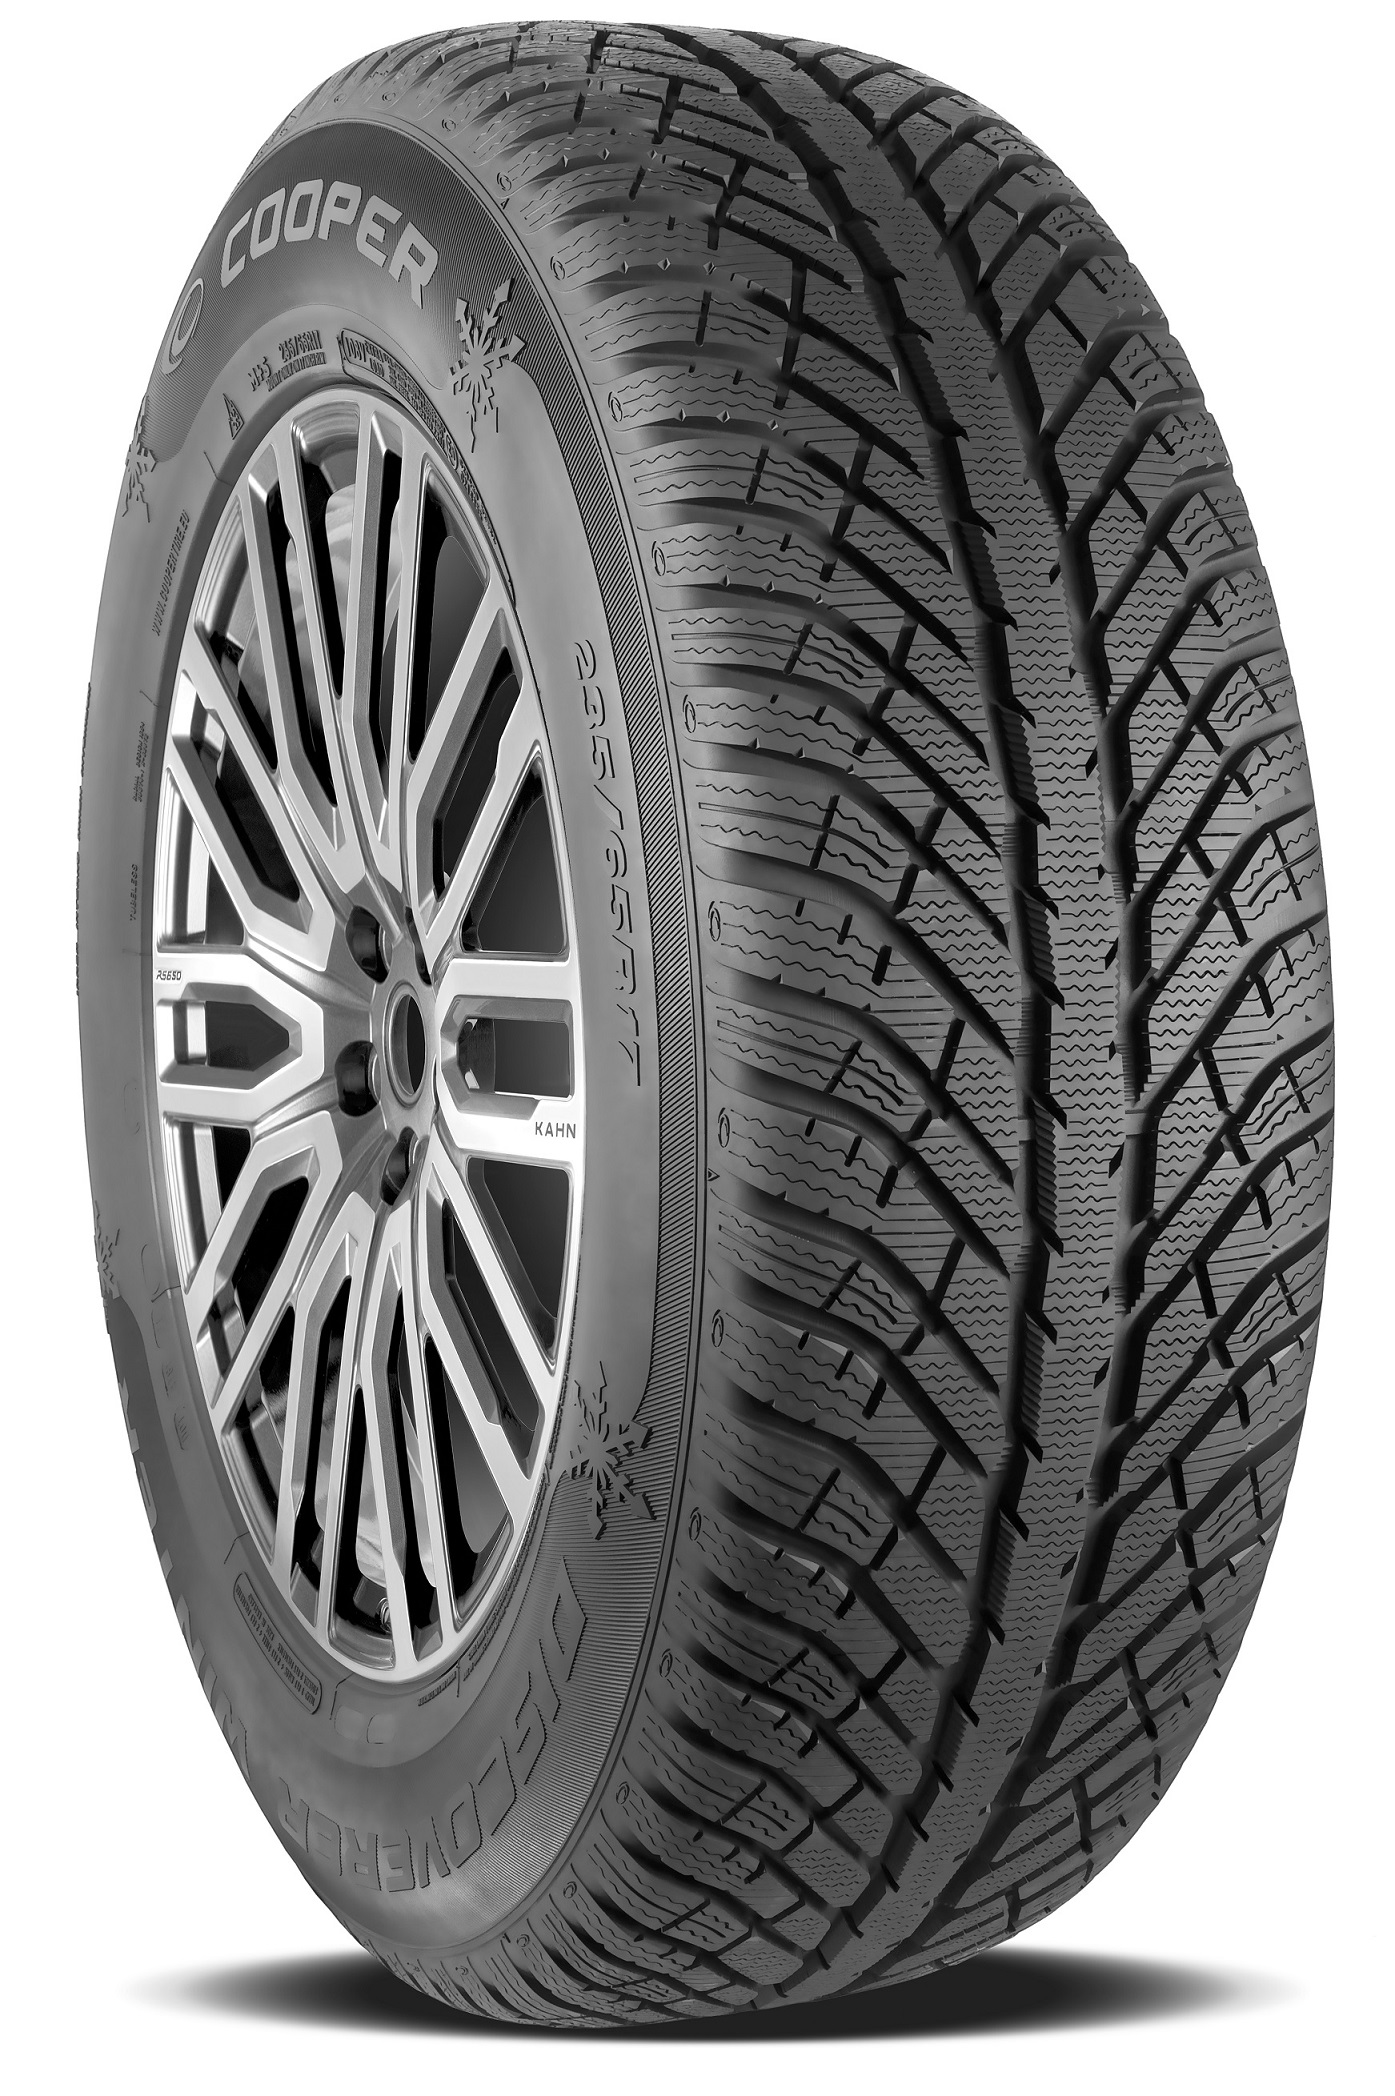 Gomme Nuove Cooper Tyres 215/55 R16 93H DISCOVERER WINTER M+S pneumatici nuovi Invernale